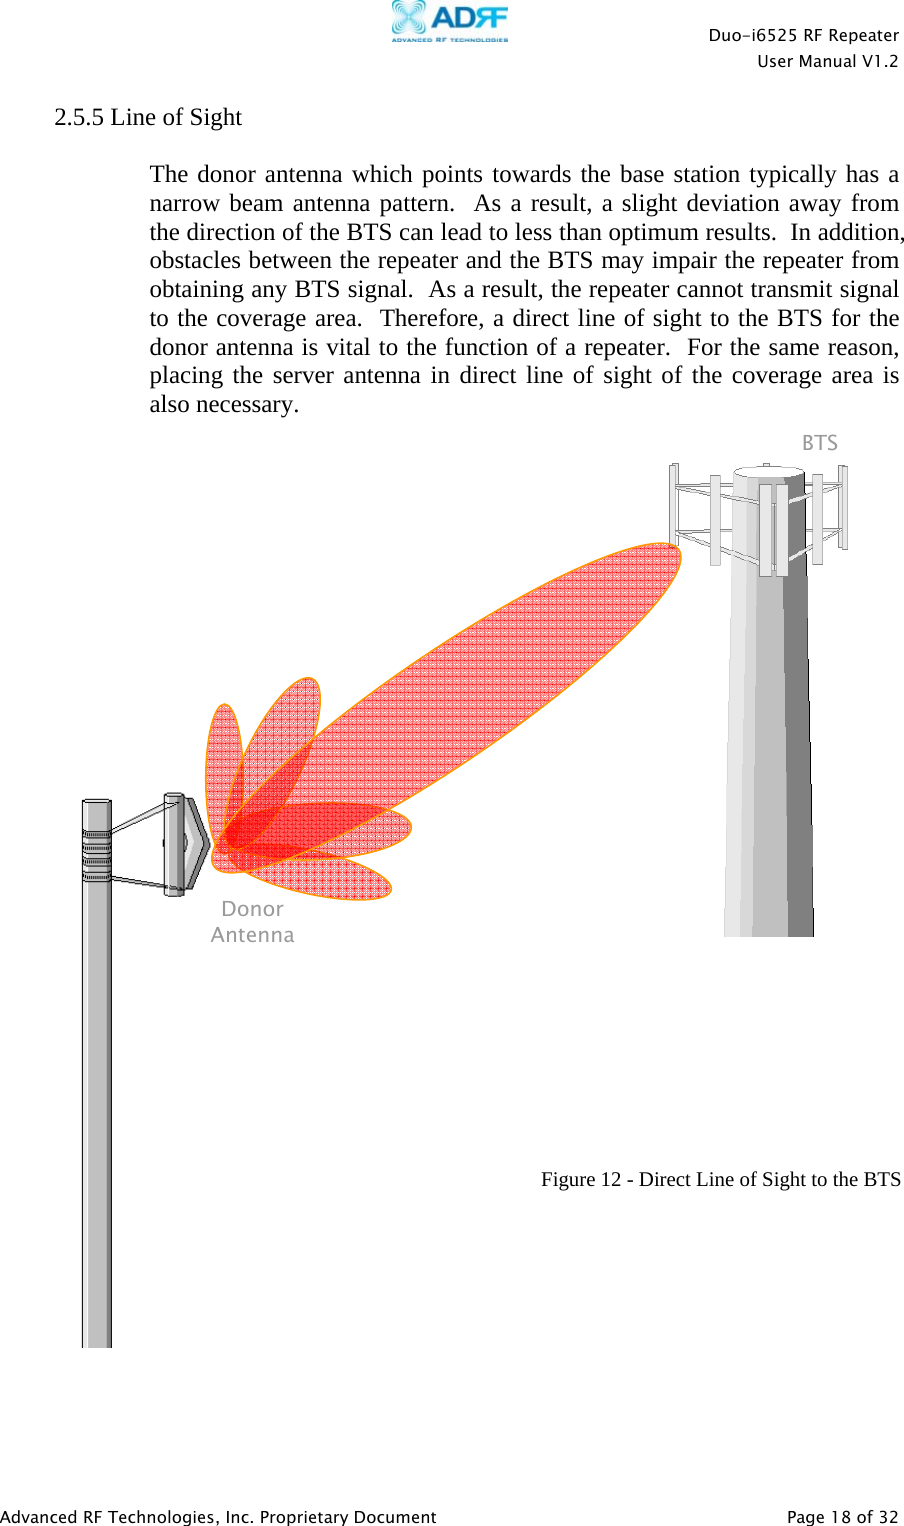    Duo-i6525 RF Repeater  User Manual V1.2  Advanced RF Technologies, Inc. Proprietary Document   Page 18 of 32  2.5.5 Line of Sight   The donor antenna which points towards the base station typically has a narrow beam antenna pattern.  As a result, a slight deviation away from the direction of the BTS can lead to less than optimum results.  In addition, obstacles between the repeater and the BTS may impair the repeater from obtaining any BTS signal.  As a result, the repeater cannot transmit signal to the coverage area.  Therefore, a direct line of sight to the BTS for the donor antenna is vital to the function of a repeater.  For the same reason, placing the server antenna in direct line of sight of the coverage area is also necessary.                                Figure 12 - Direct Line of Sight to the BTS Donor Antenna BTS 